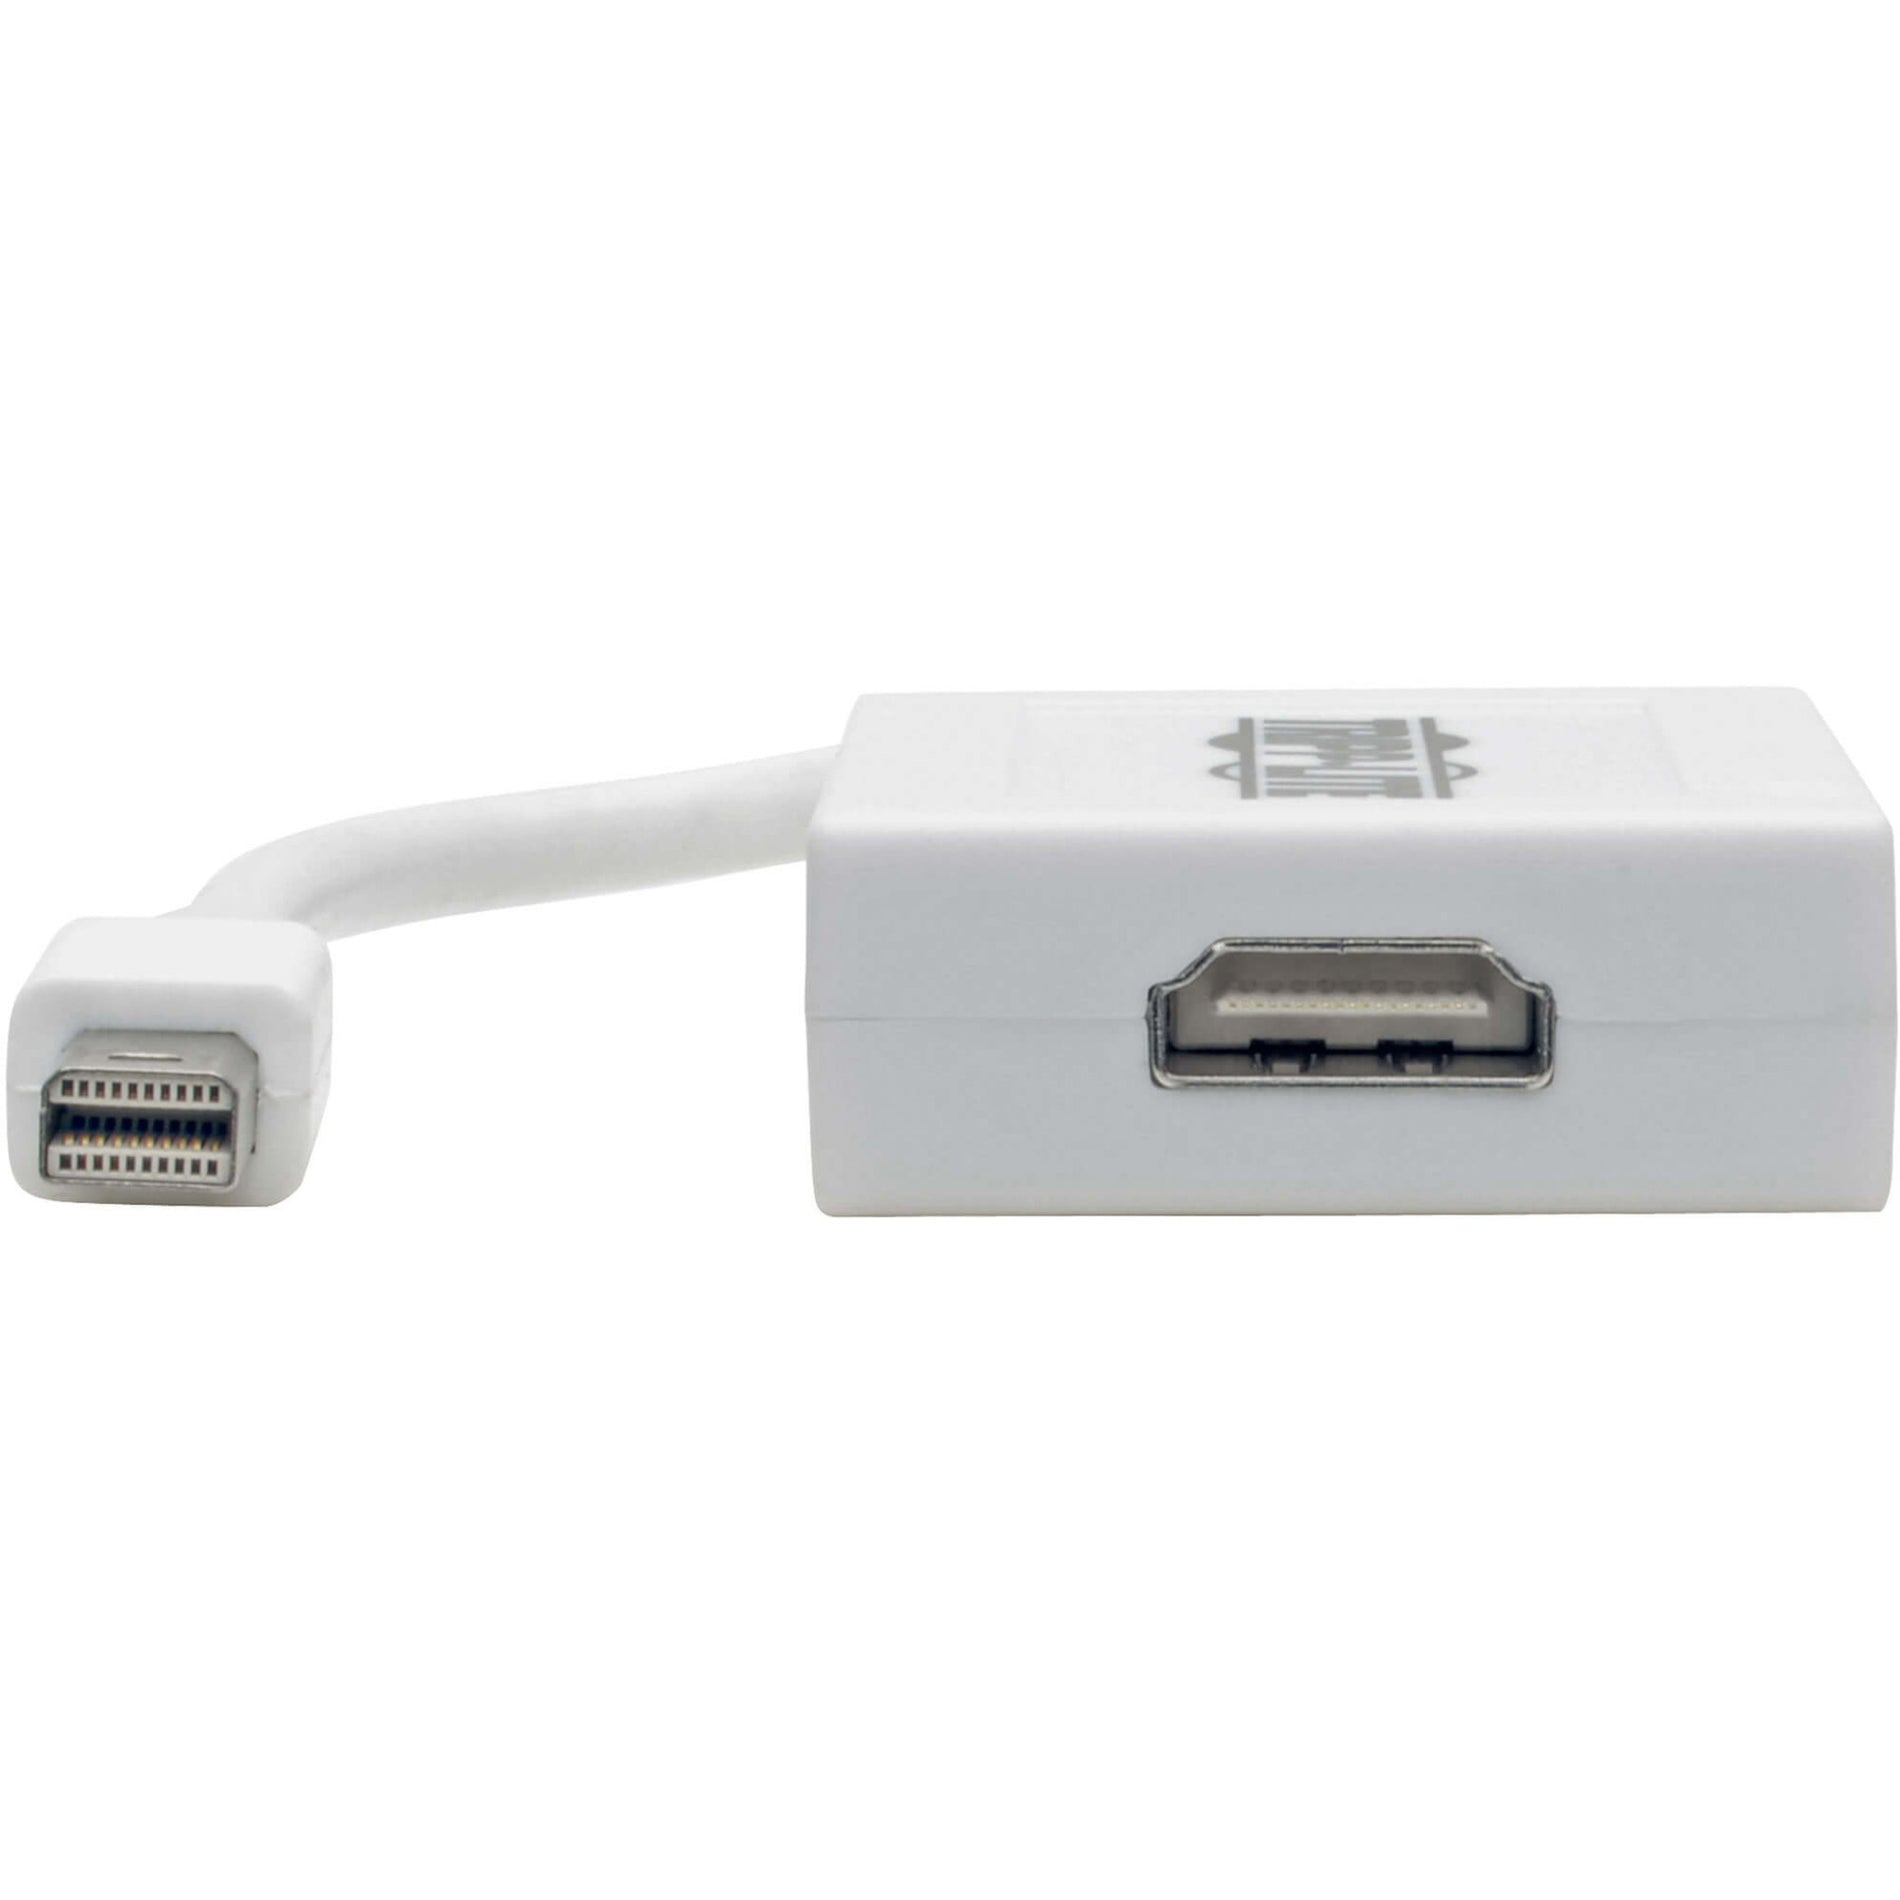 Tripp Lite P137-06N-HDMI Mini DisplayPort to HDMI Adapter, White - Connect Your Mac or PC to a HDMI Monitor